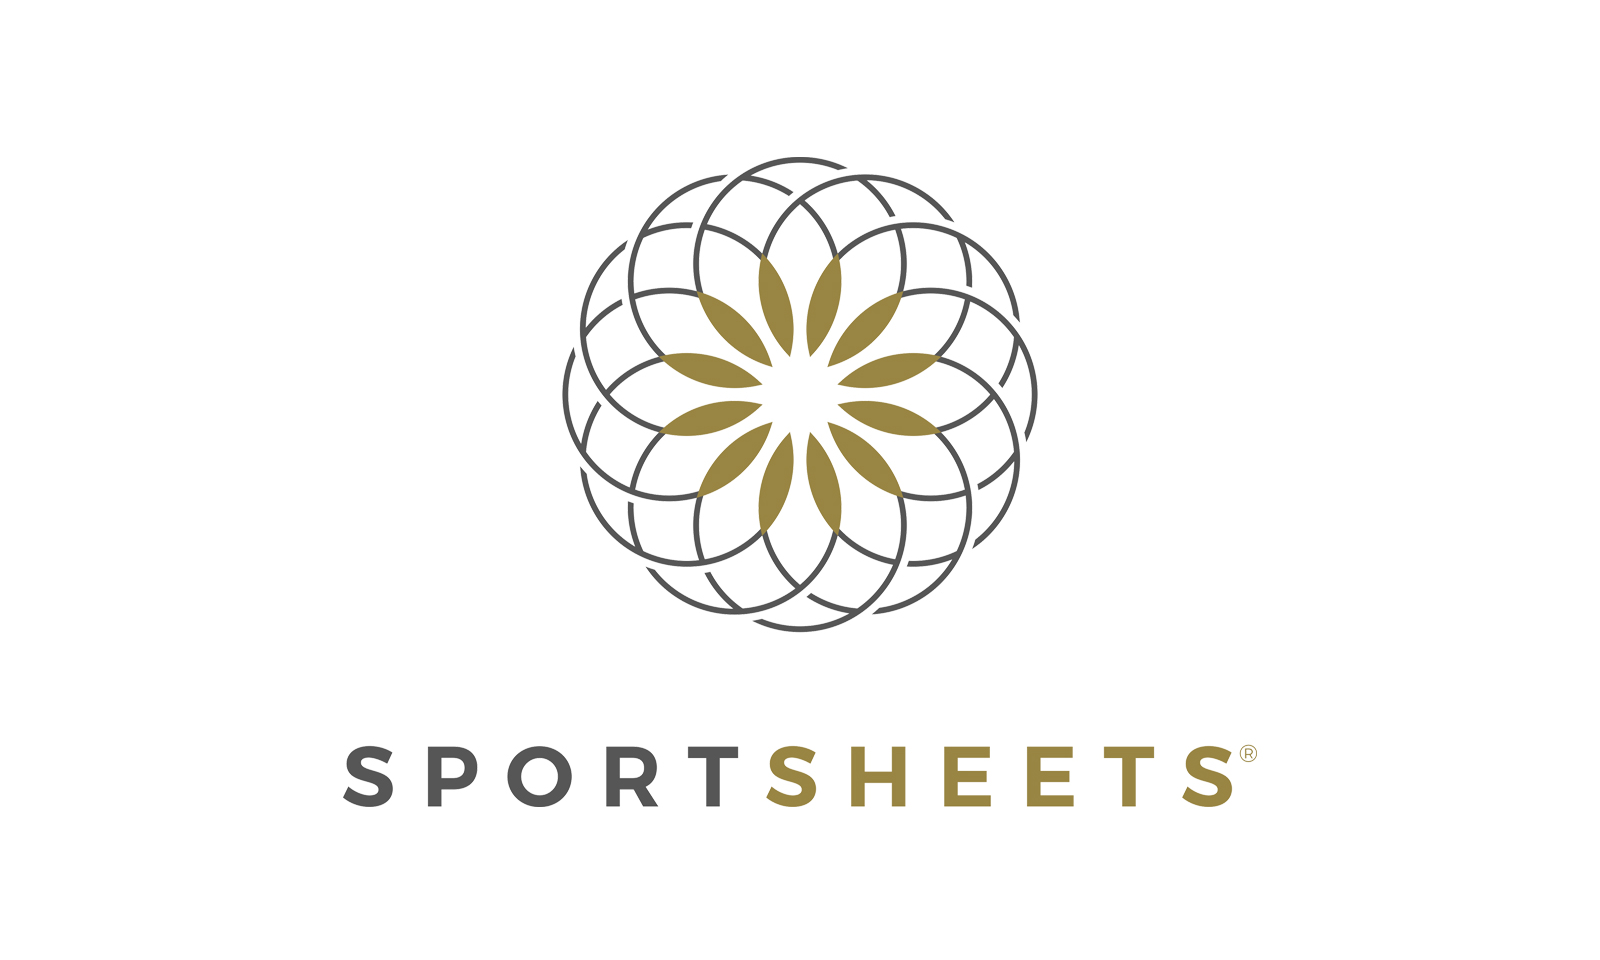 Sportsheets Wins StorErotica Award for Fetish Company of the Year